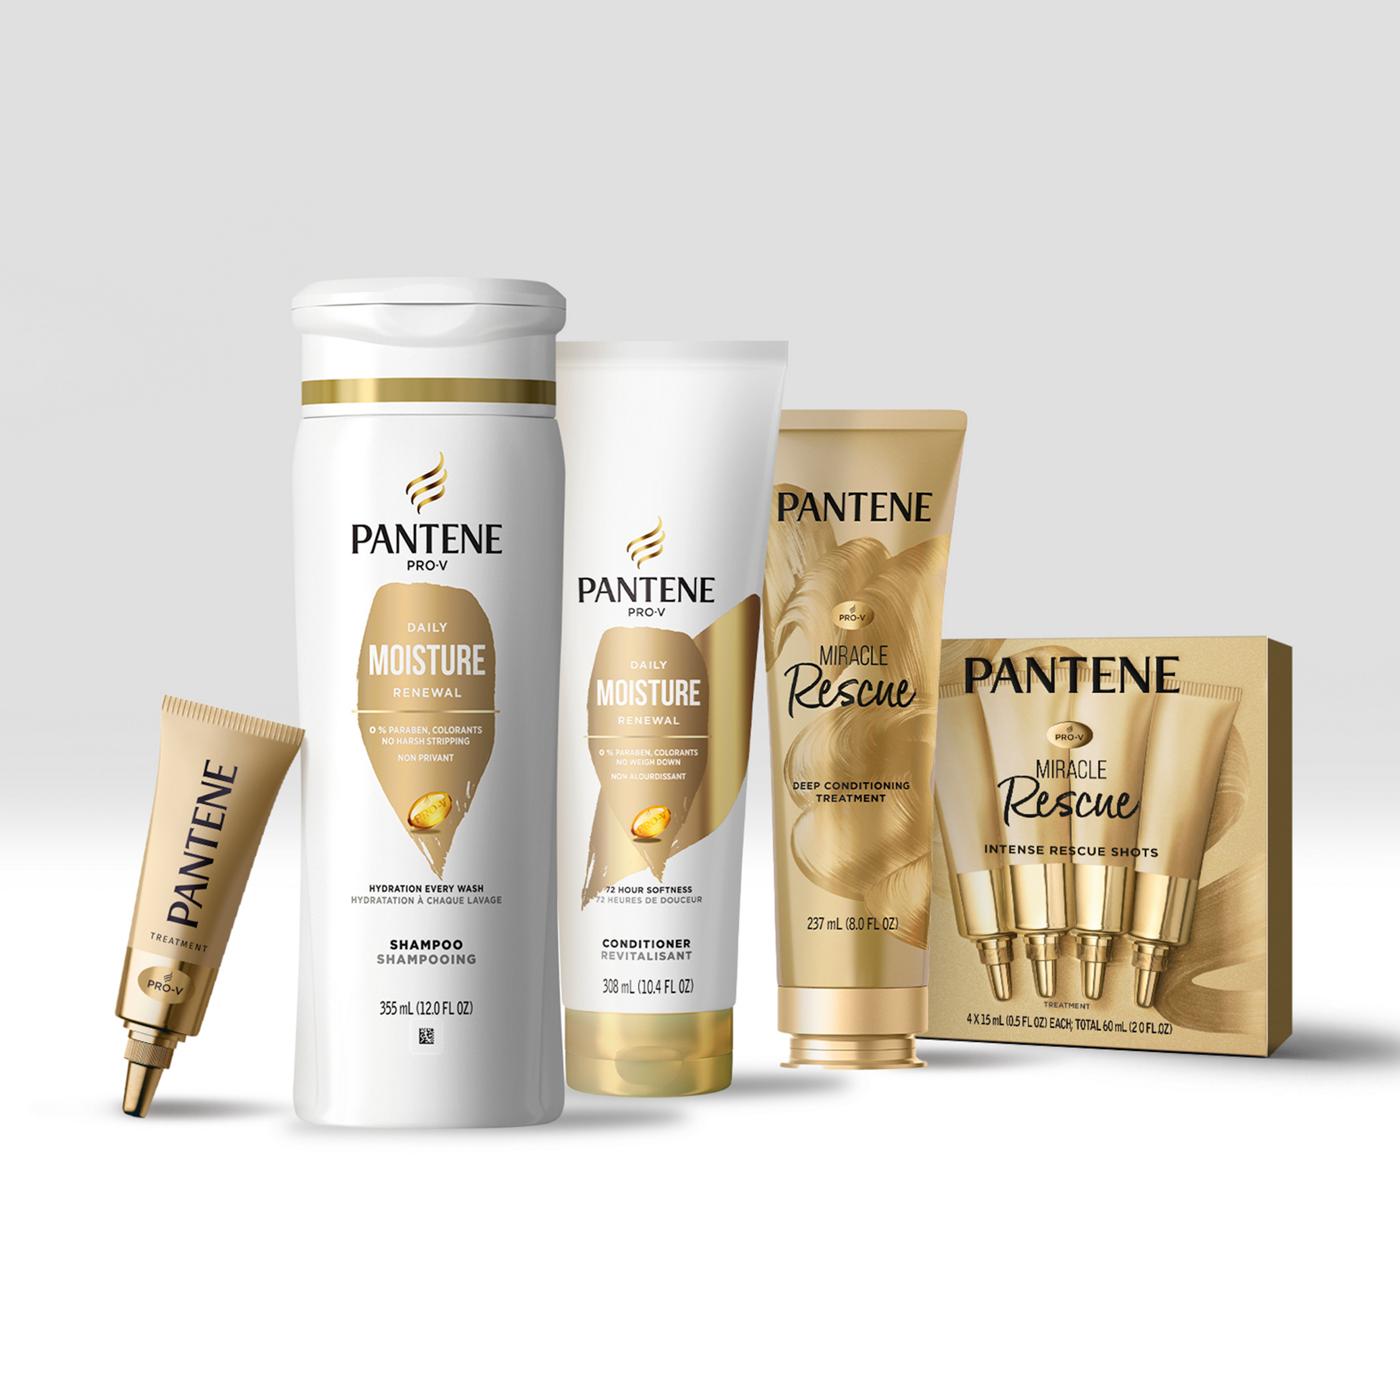 Pantene Pro-V Daily Moisture Renewal Shampoo + Conditioner - Dual Pack; image 9 of 11